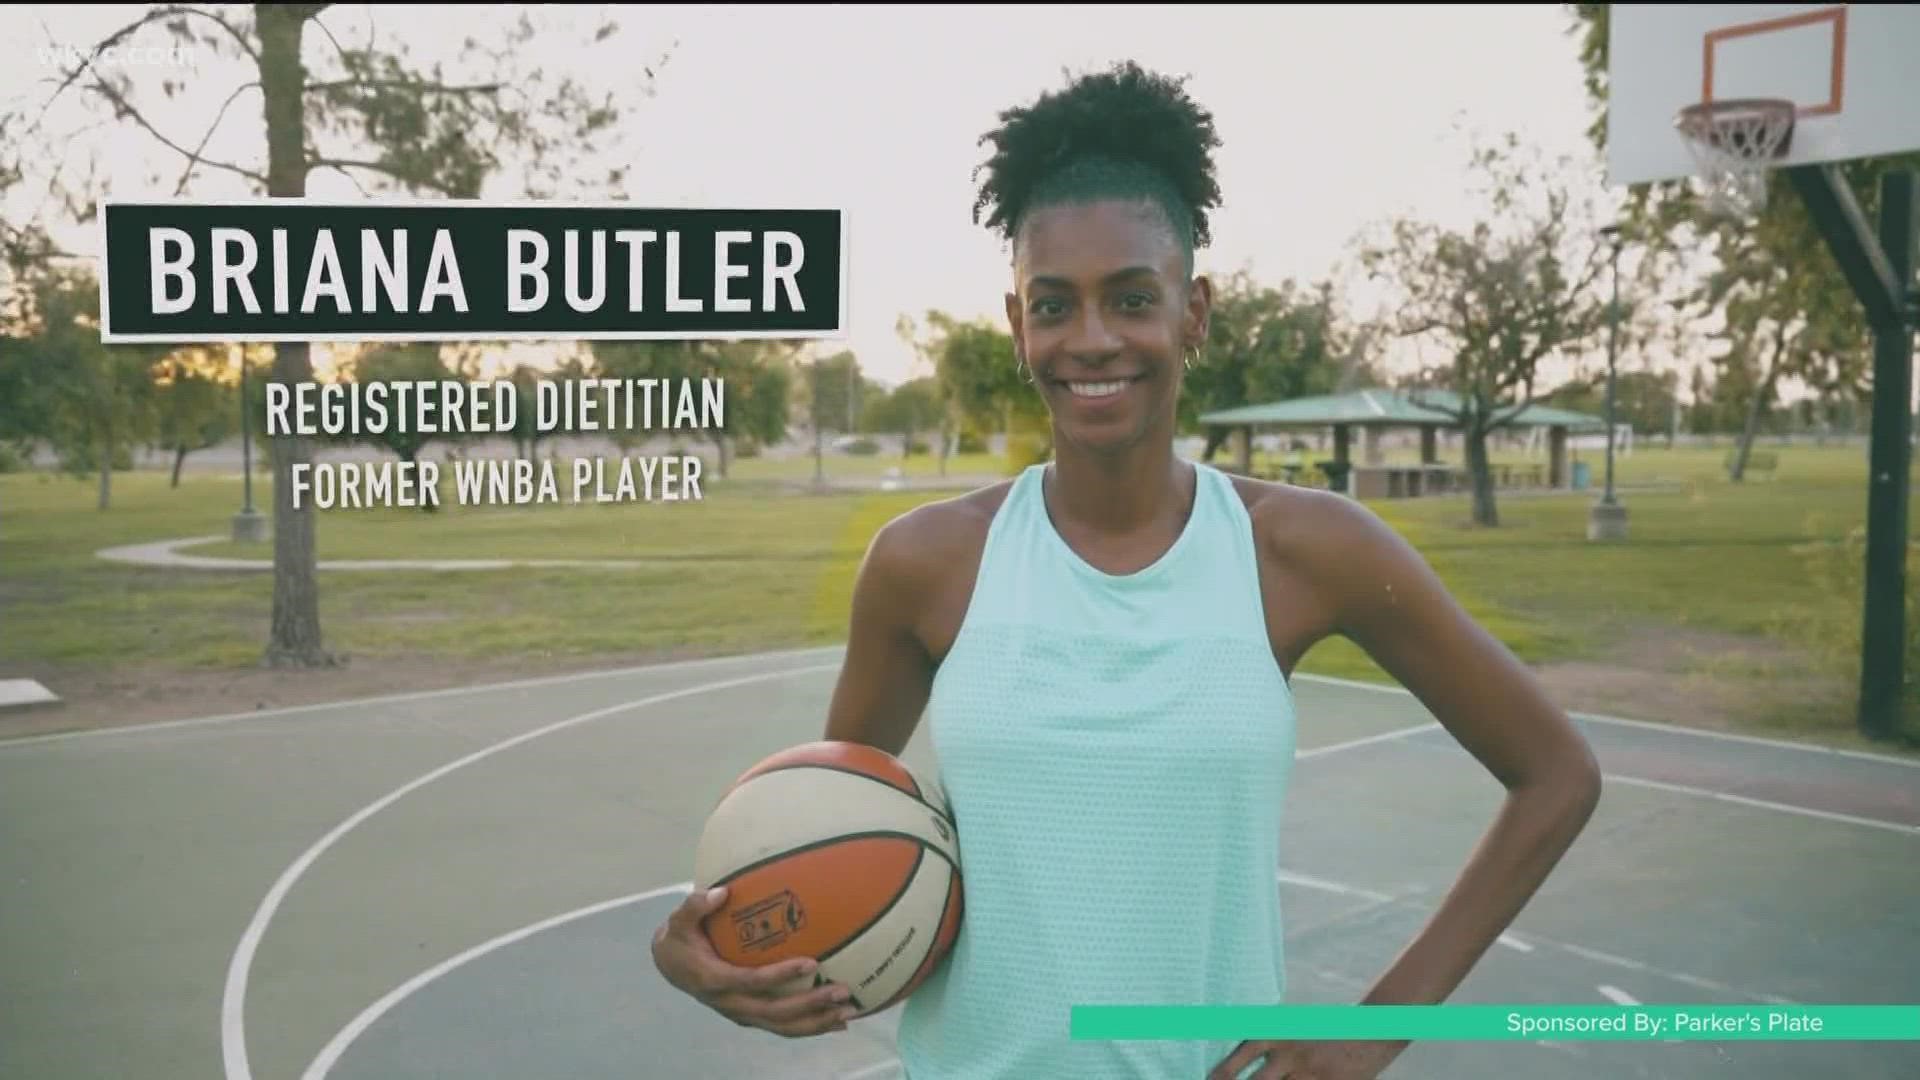 Joe talks with former WNBA Player and Registered Dietitian, Briana Butler, about keeping your body hydrated and fueled so you can stay active!